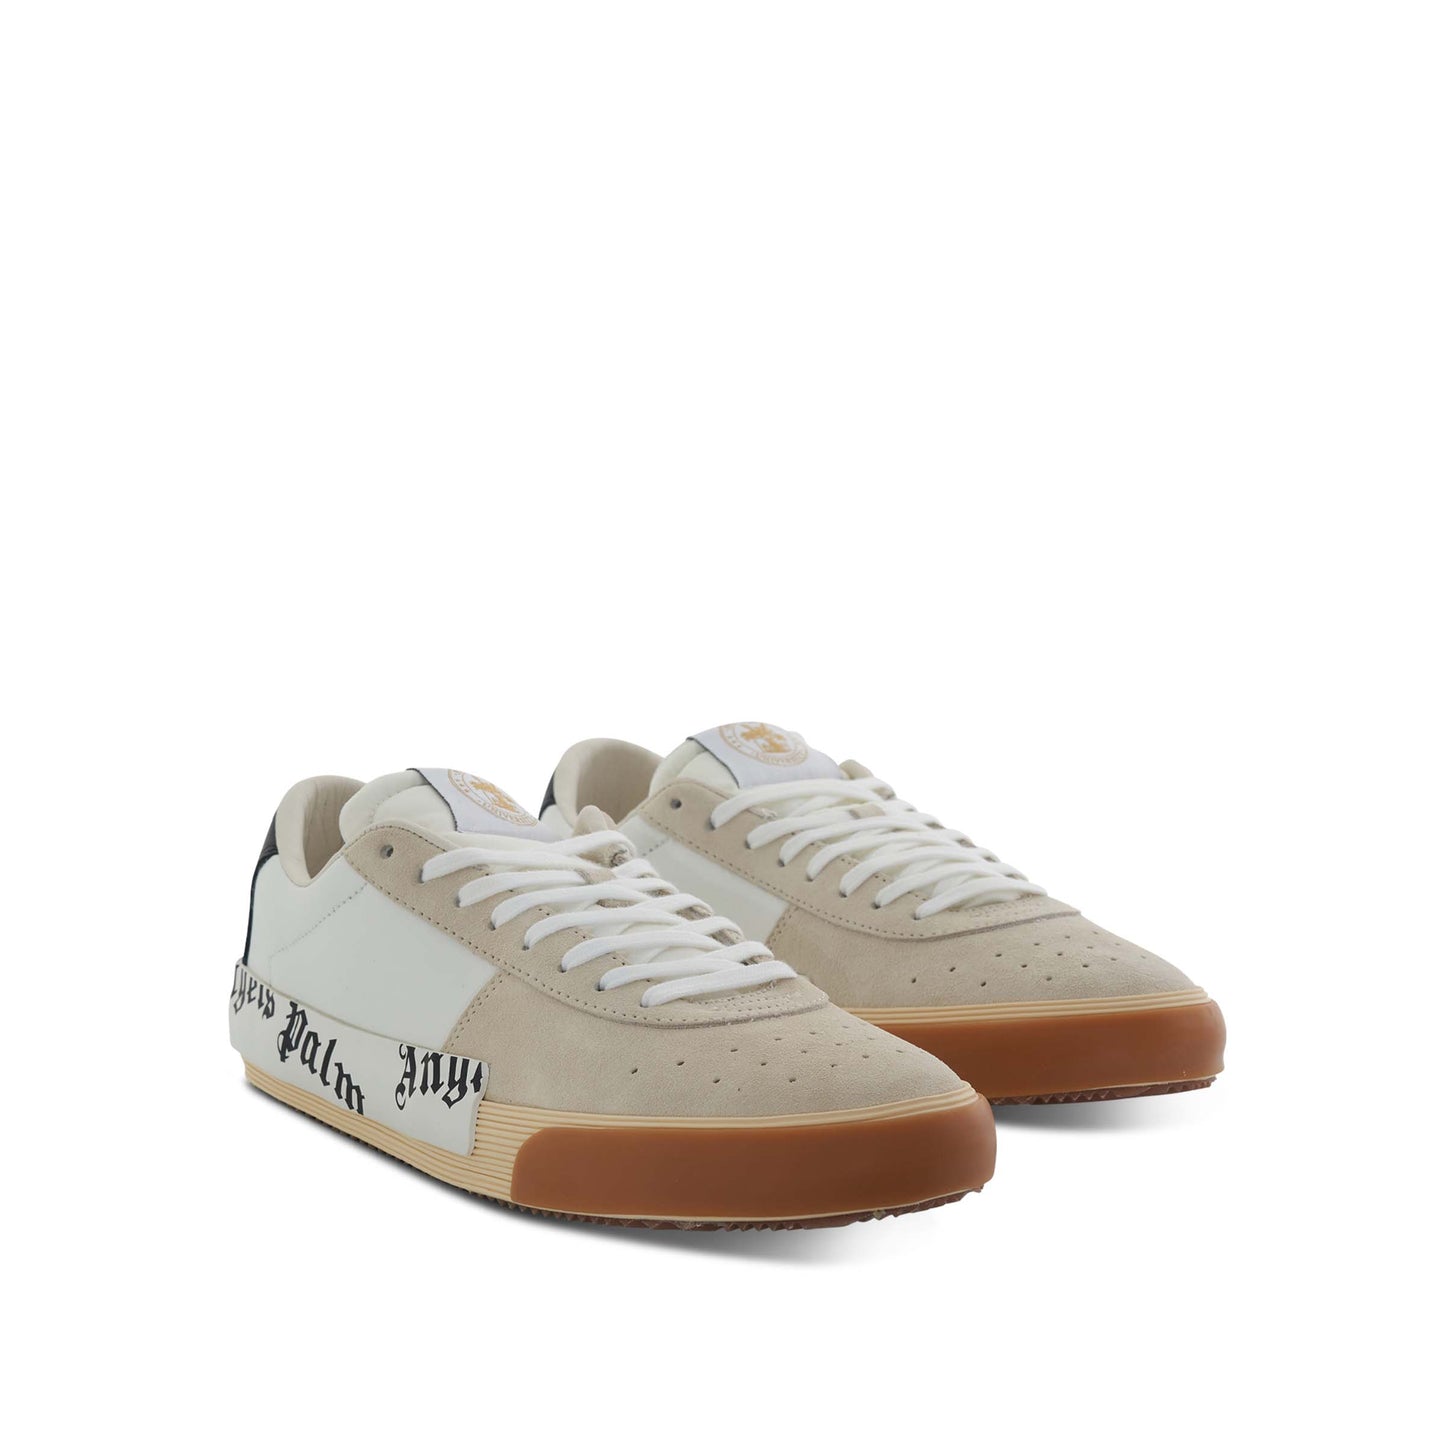 New Vulcanized Suede And Calf Sneaker in White